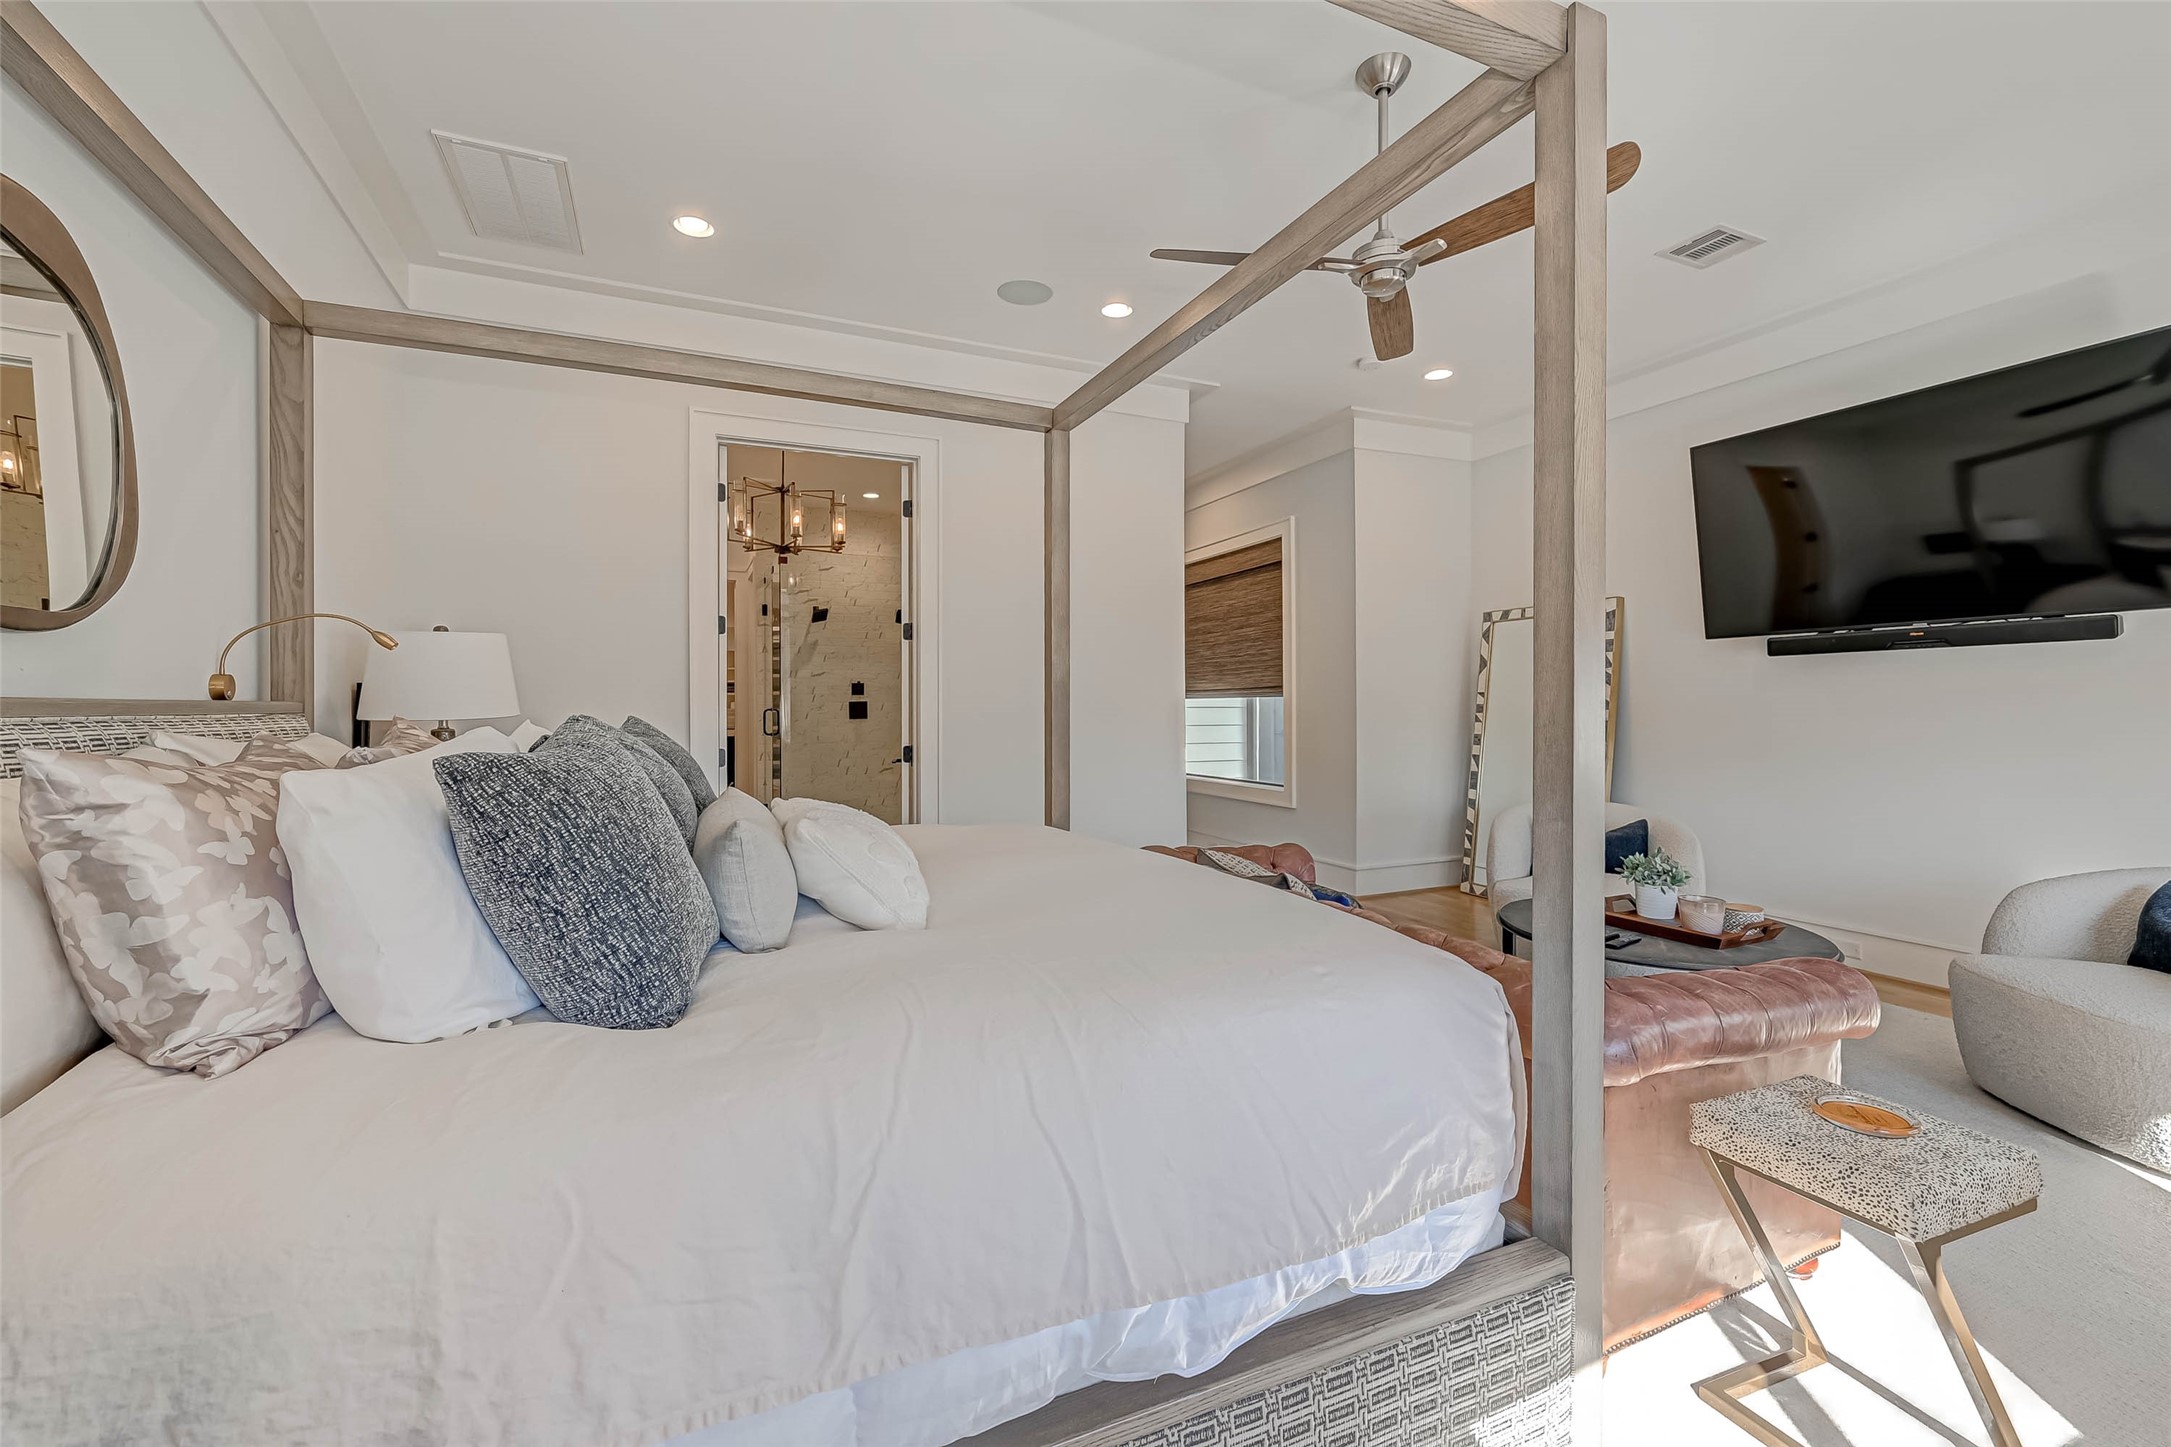 The bedroom is a private retreat designed for maximum relaxation and privacy.